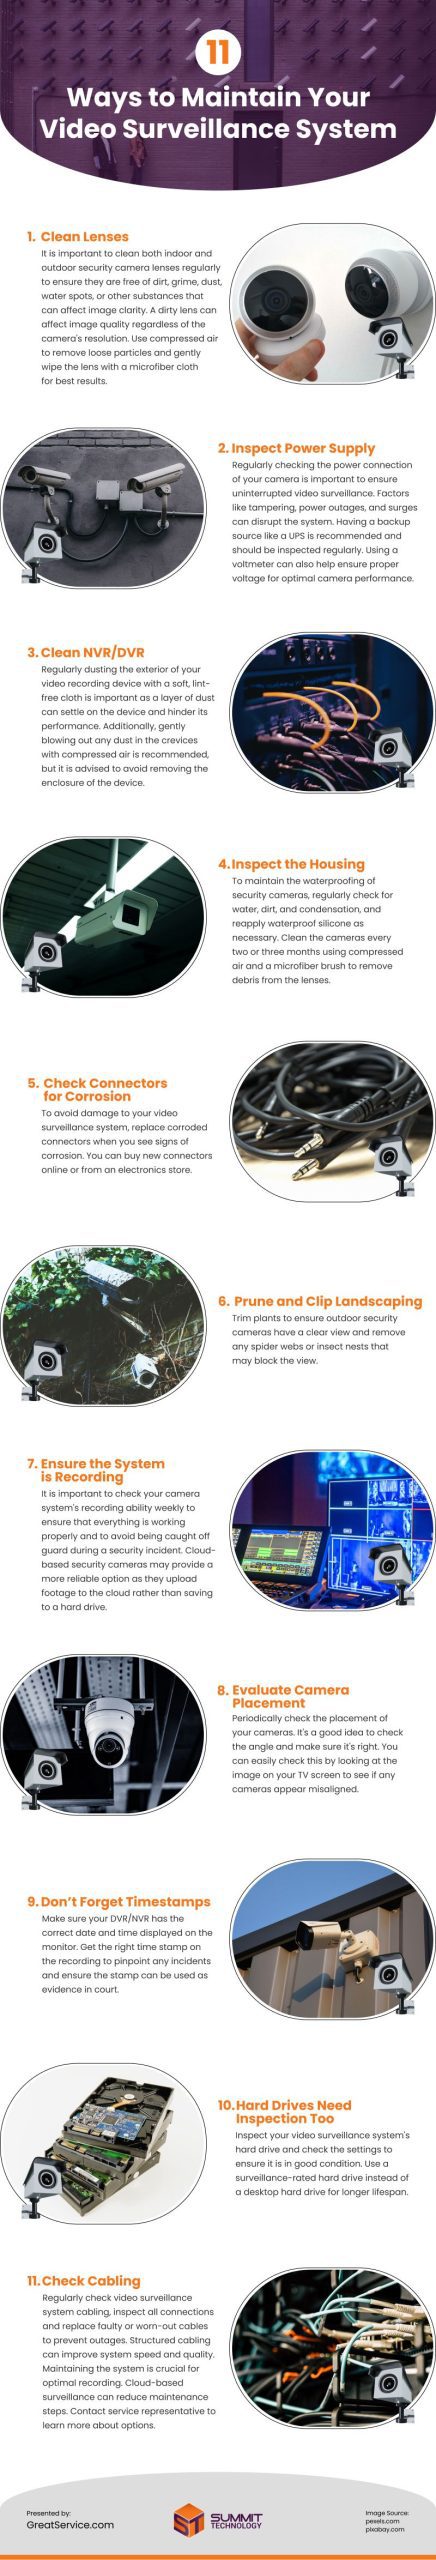 11 Ways to Maintain Your Video Surveillance System Infographic